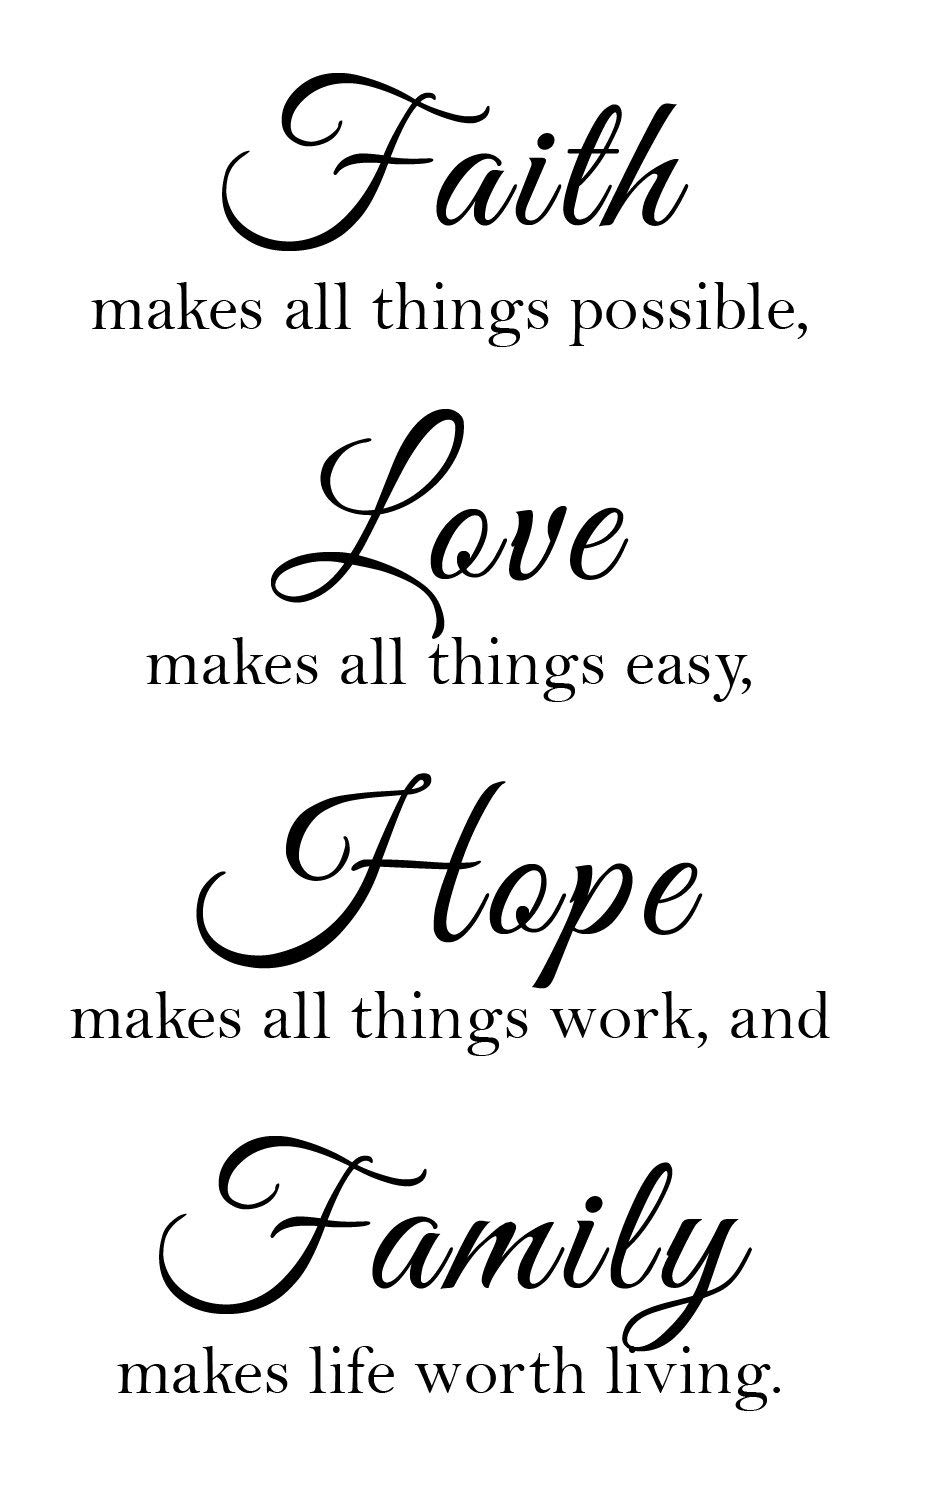 Book Cover Newclew Faith Makes All Things Possible, Love Makes All Things Easy, Hope Make All Things Work, and Family Makes Life Worth Living Wall Décor Decal Prayer Church Jesus (22Wx37H, Black) 22Wx37H Black